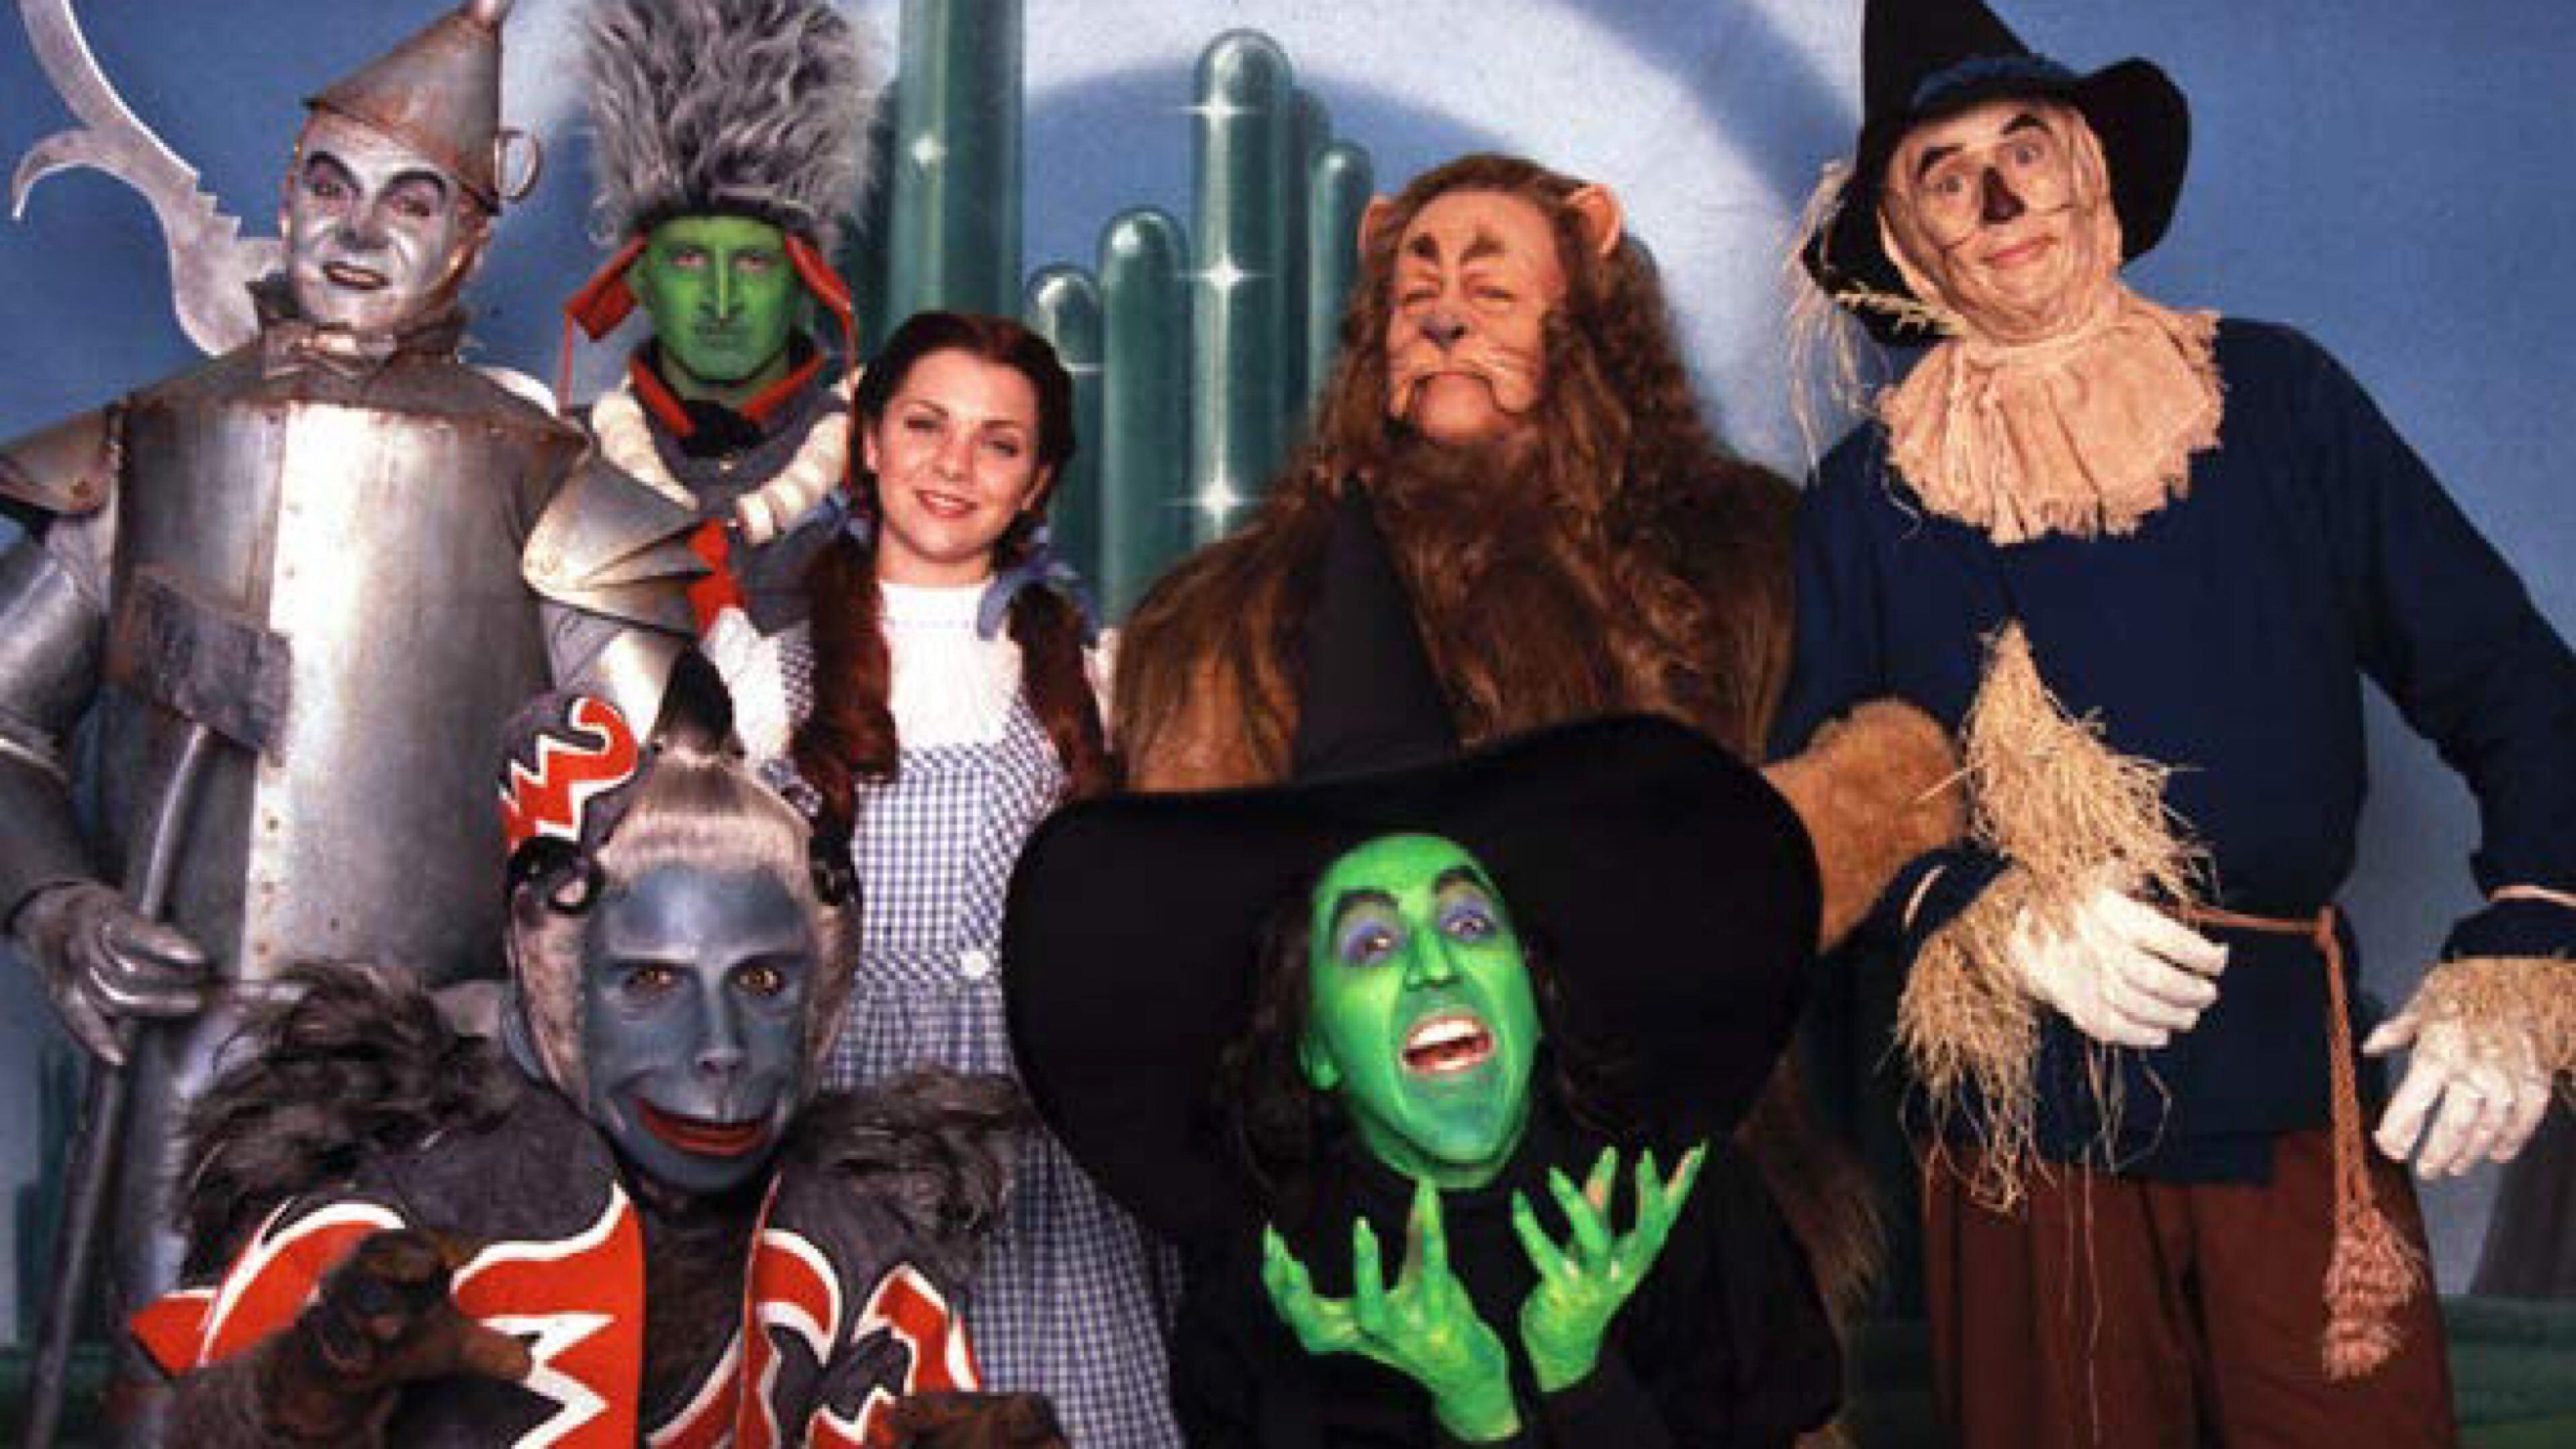 A Tribute to the Wizard of Oz backdrop